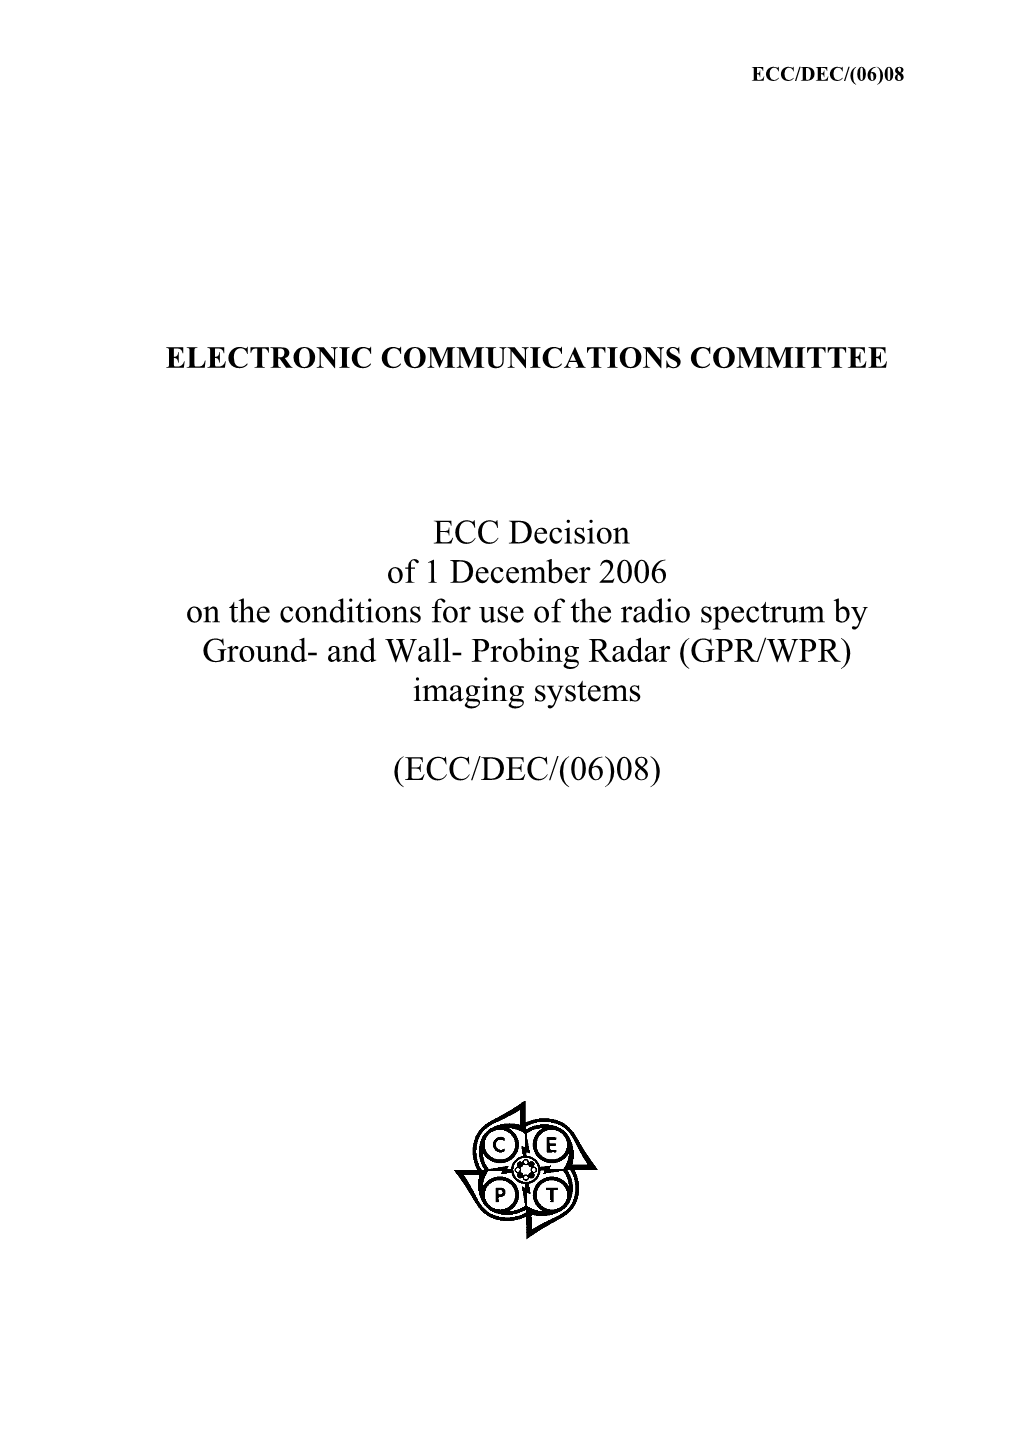 Electronic Communications Committee